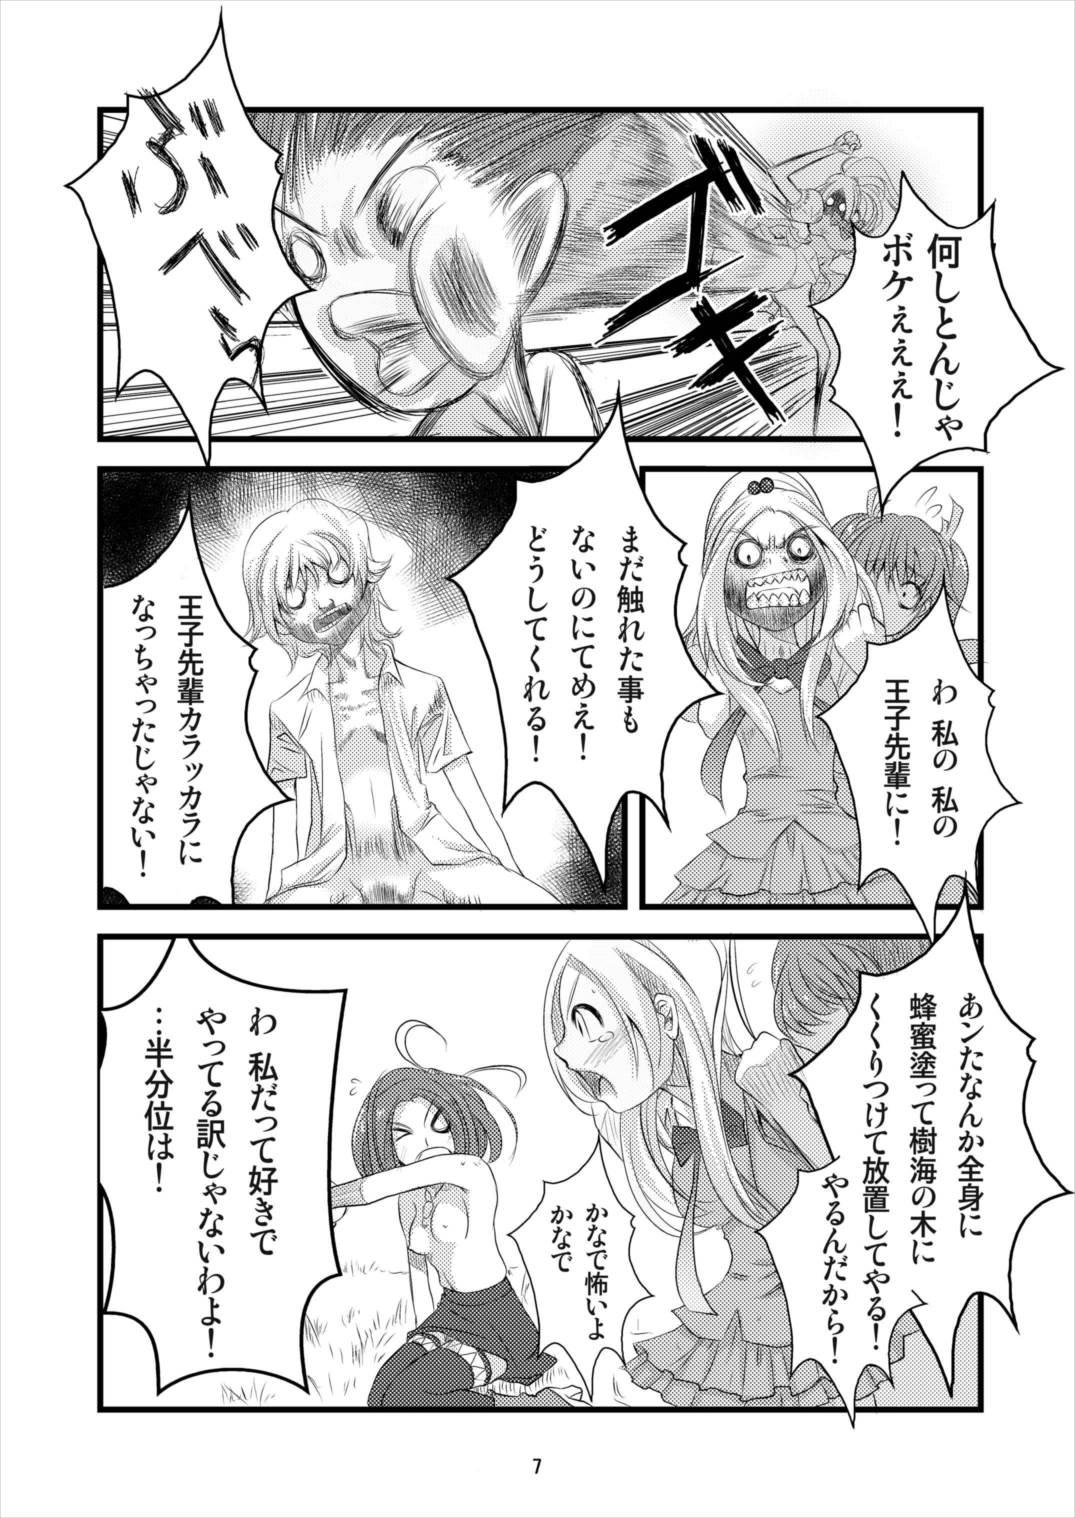 Dick Suck 8:45 - Suite precure Woman Fucking - Page 7